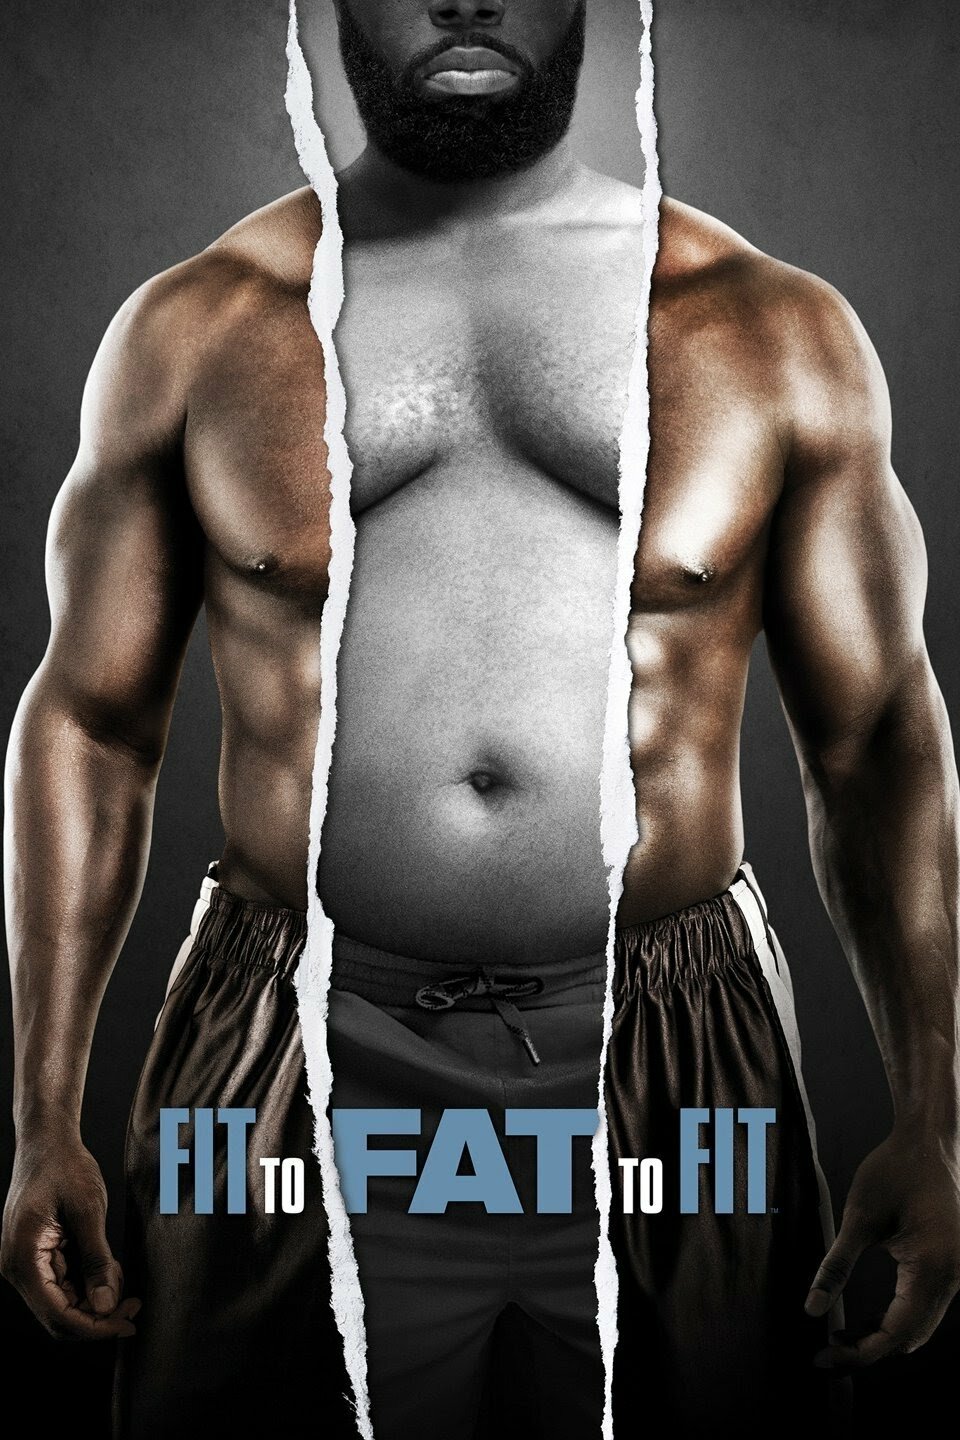 Fit to Fat to Fit ne zaman